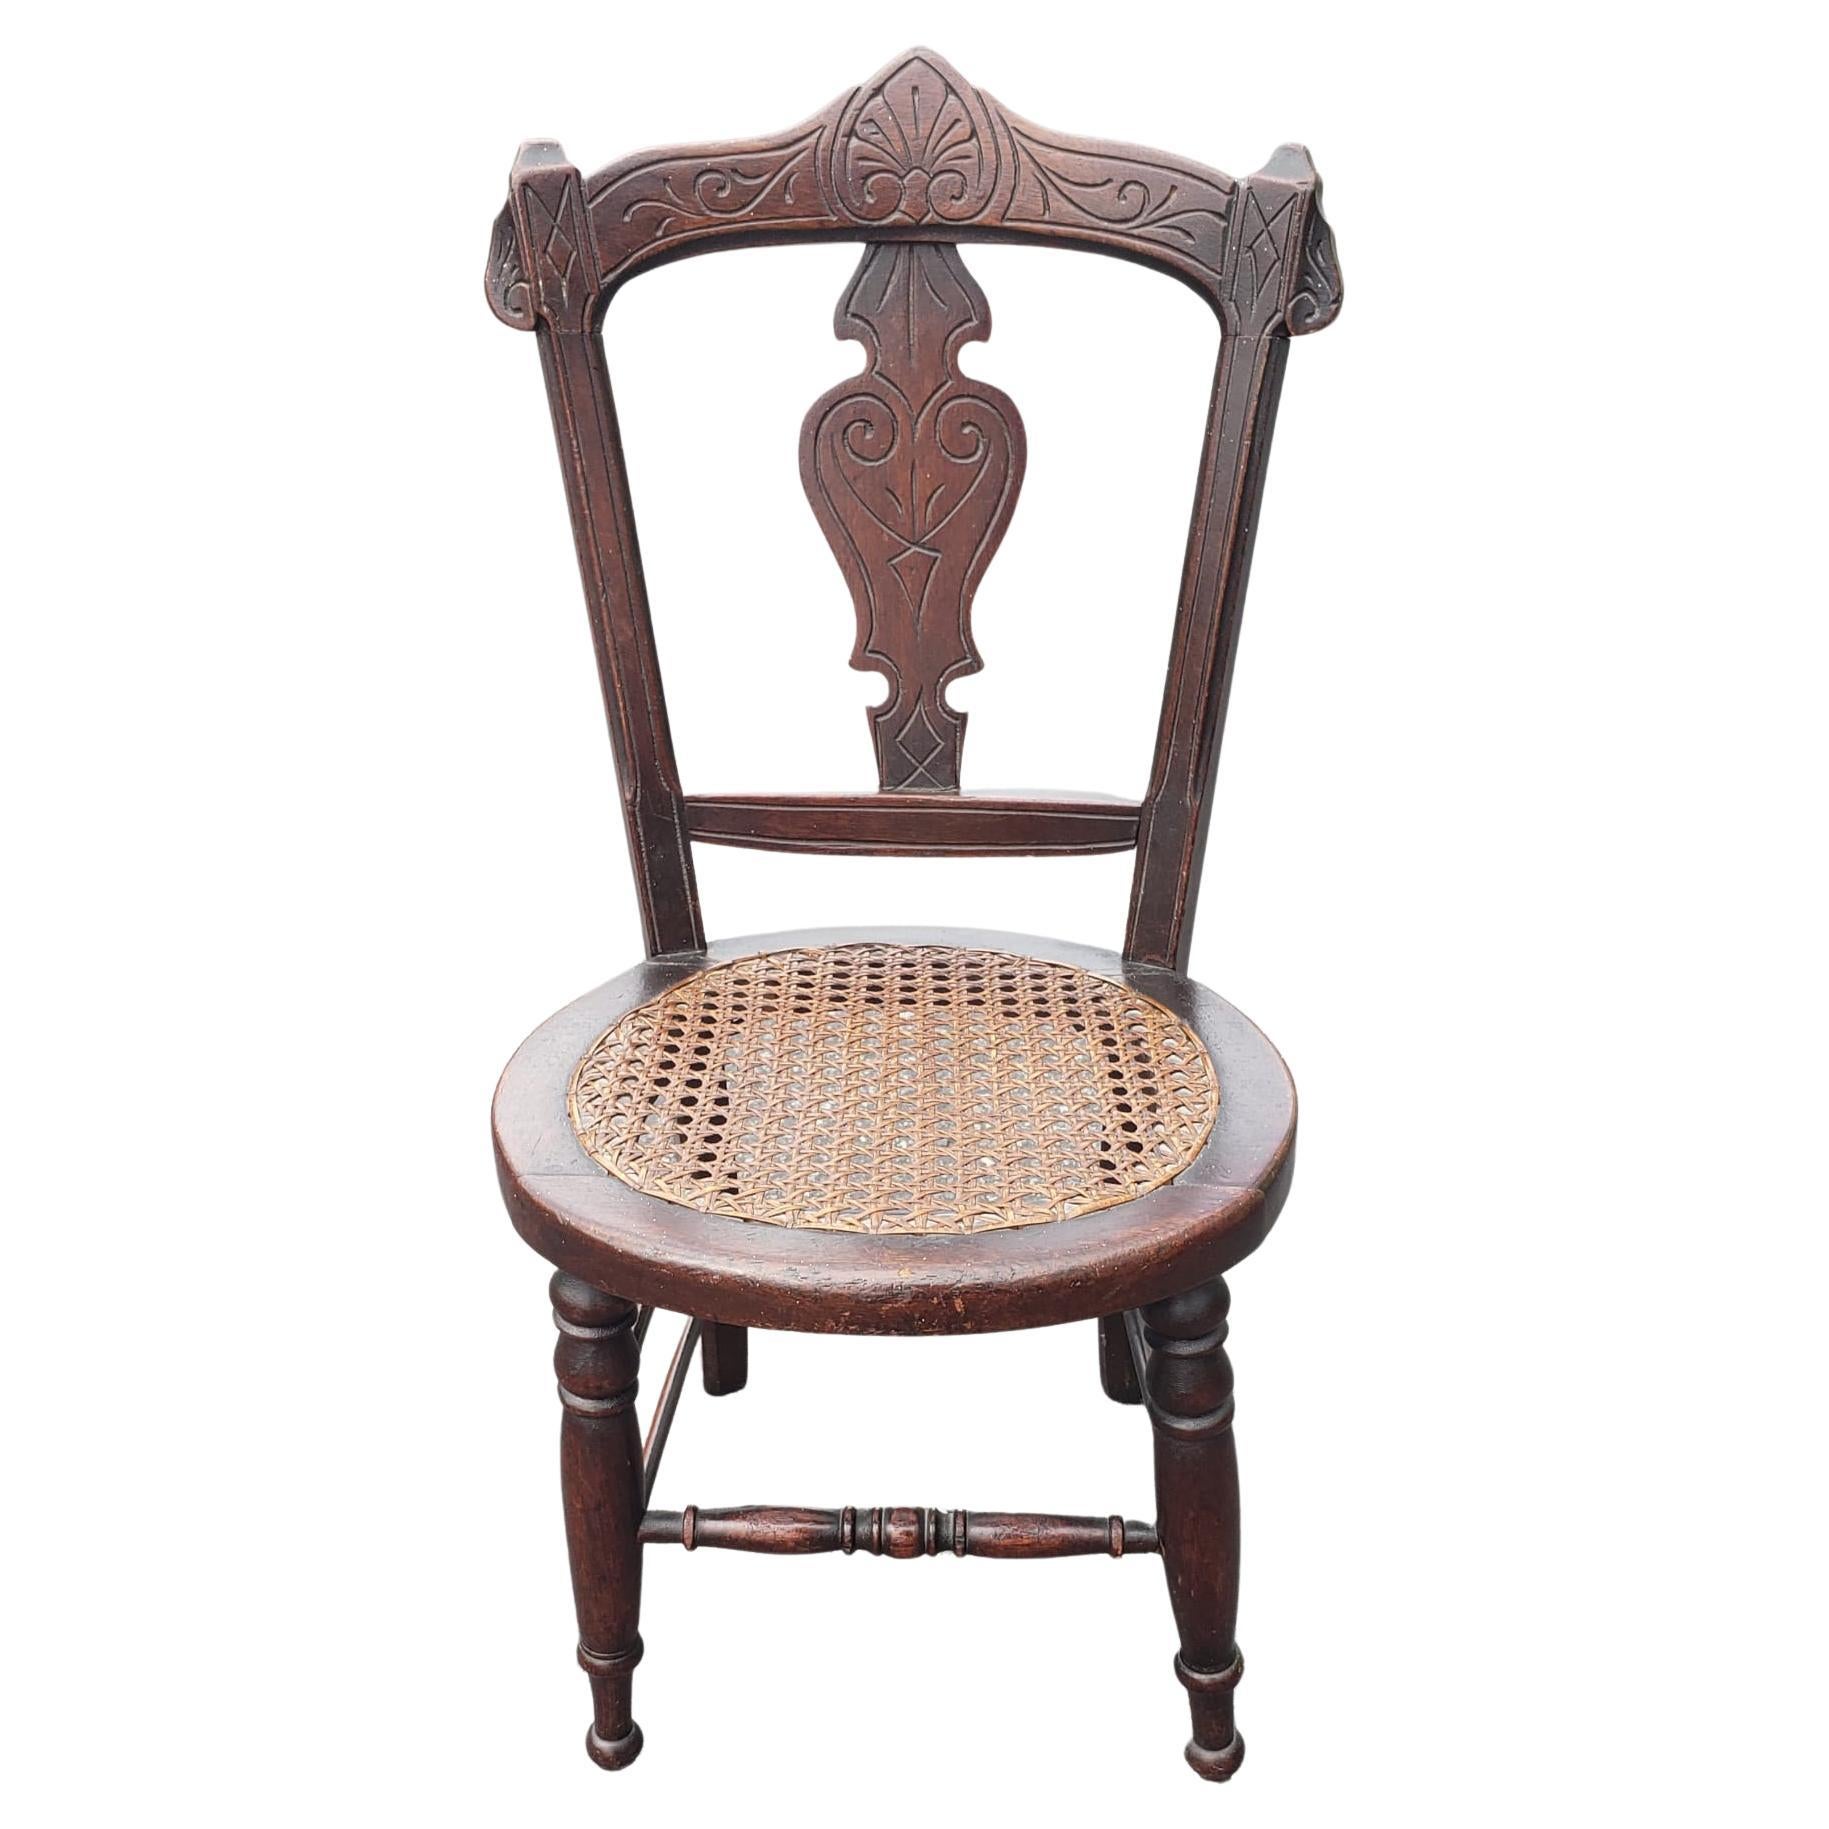 An early 20th century Victorian Style Carved Walnut and Cane Seat Youth Chair in good vintage condition.